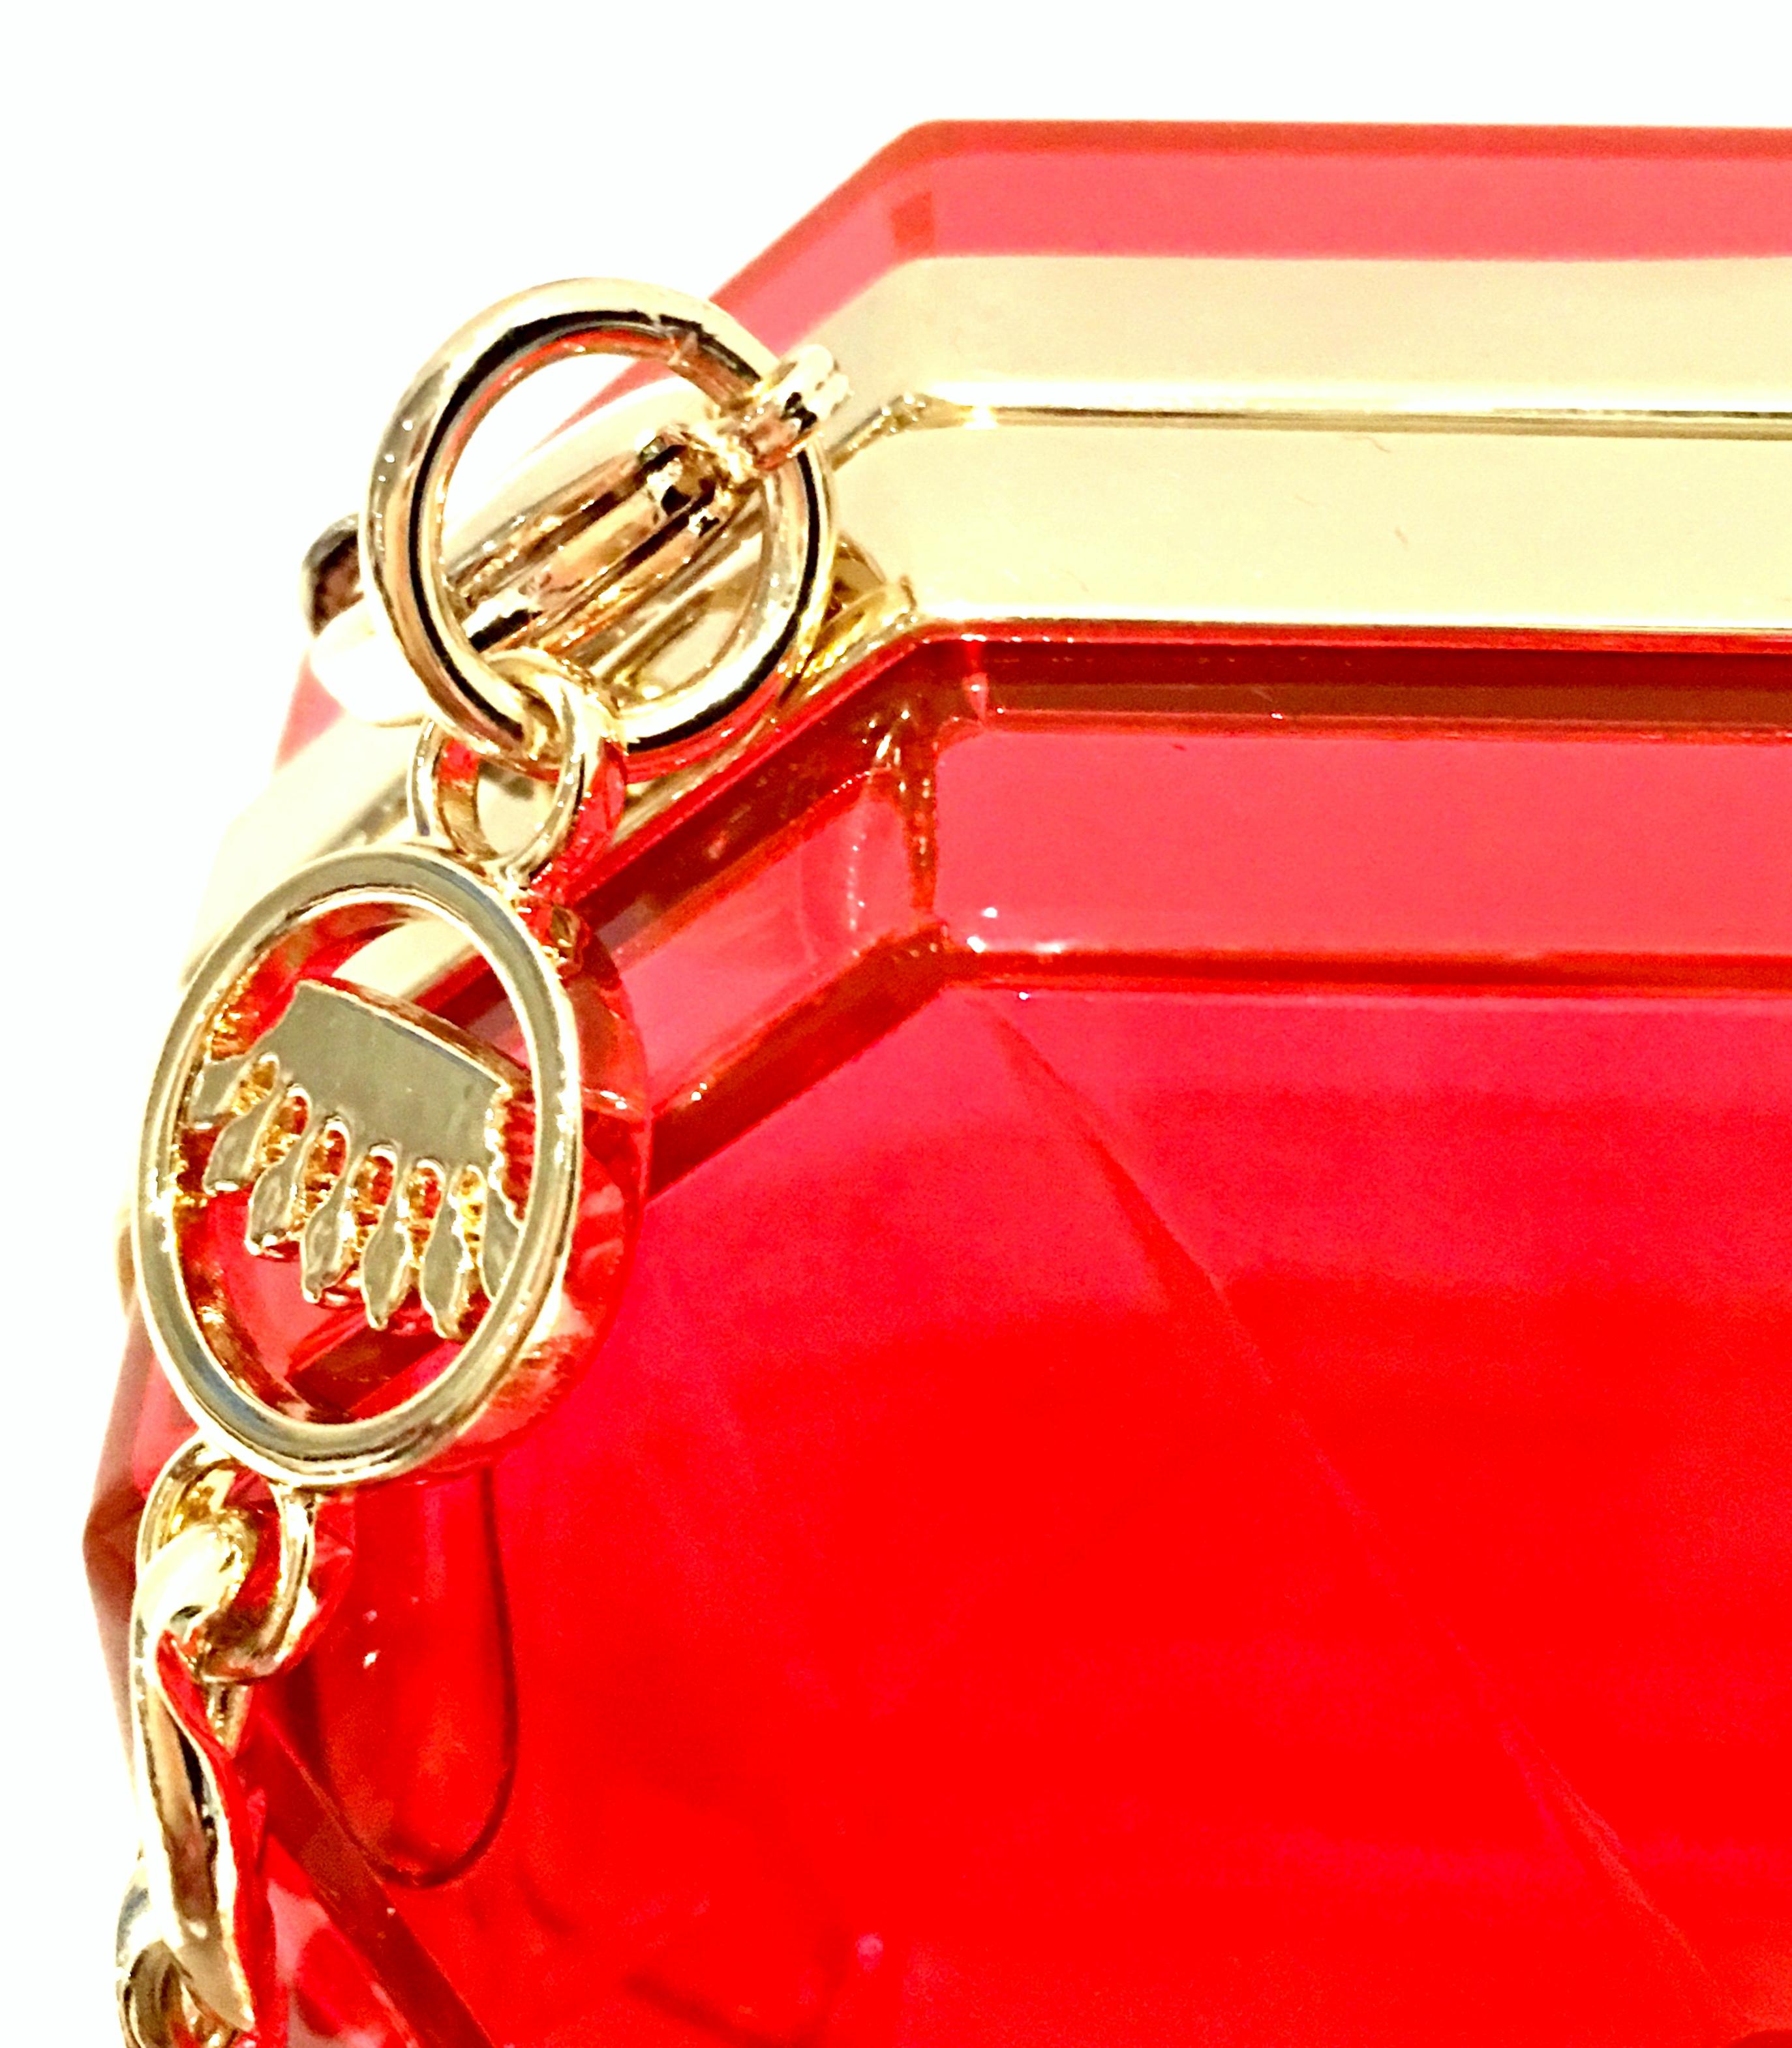 21st Century Lucite & Gold Minaudiere Clutch Hand Bag By, Juicy Couture For Sale 4